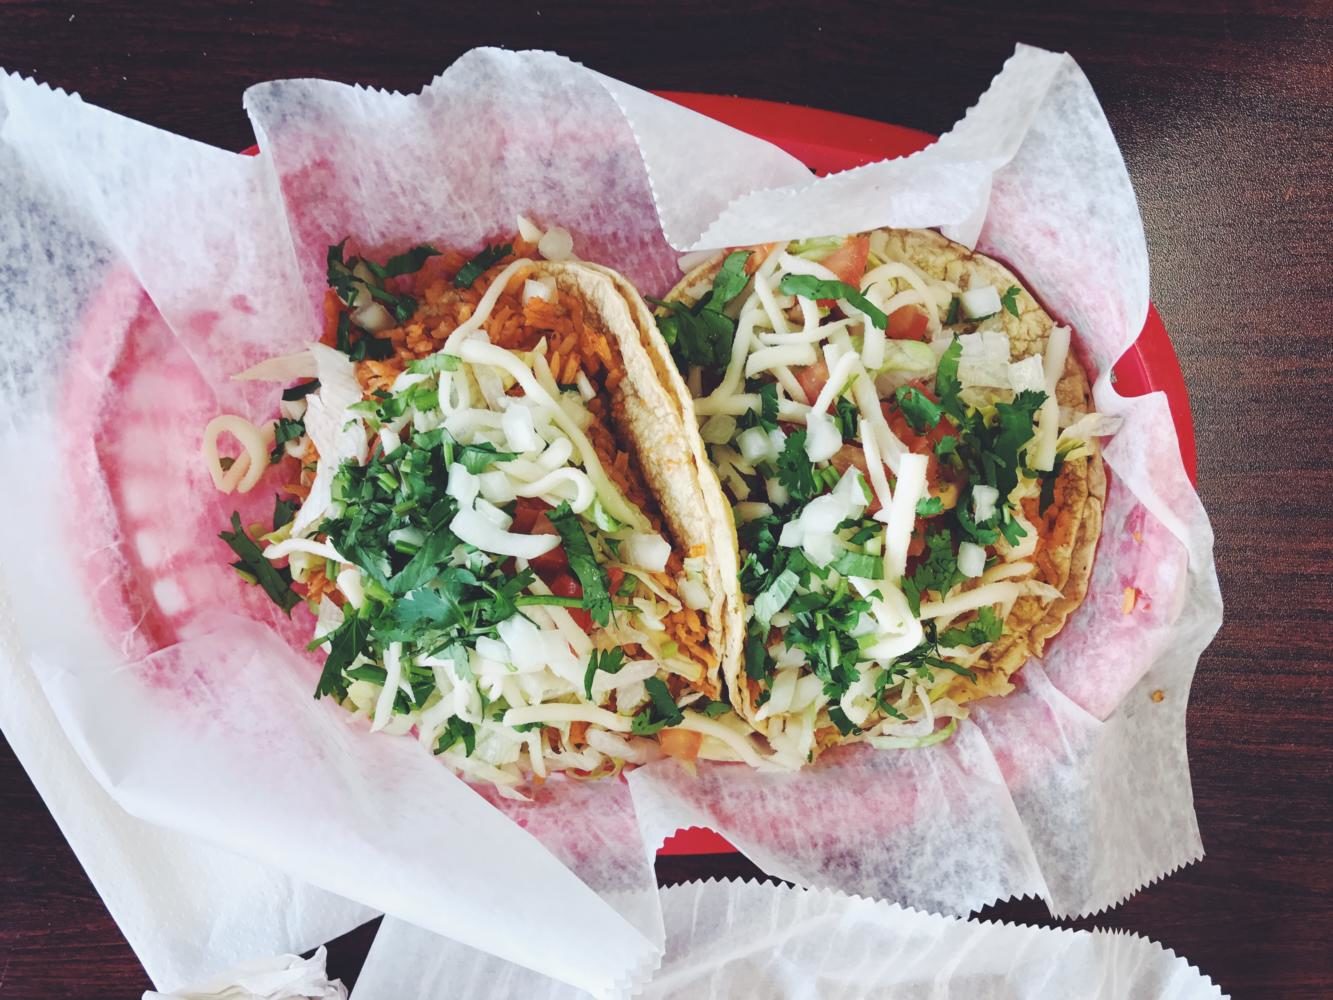 This is a traditional Mexican taco, that you can purchase at Arturos.